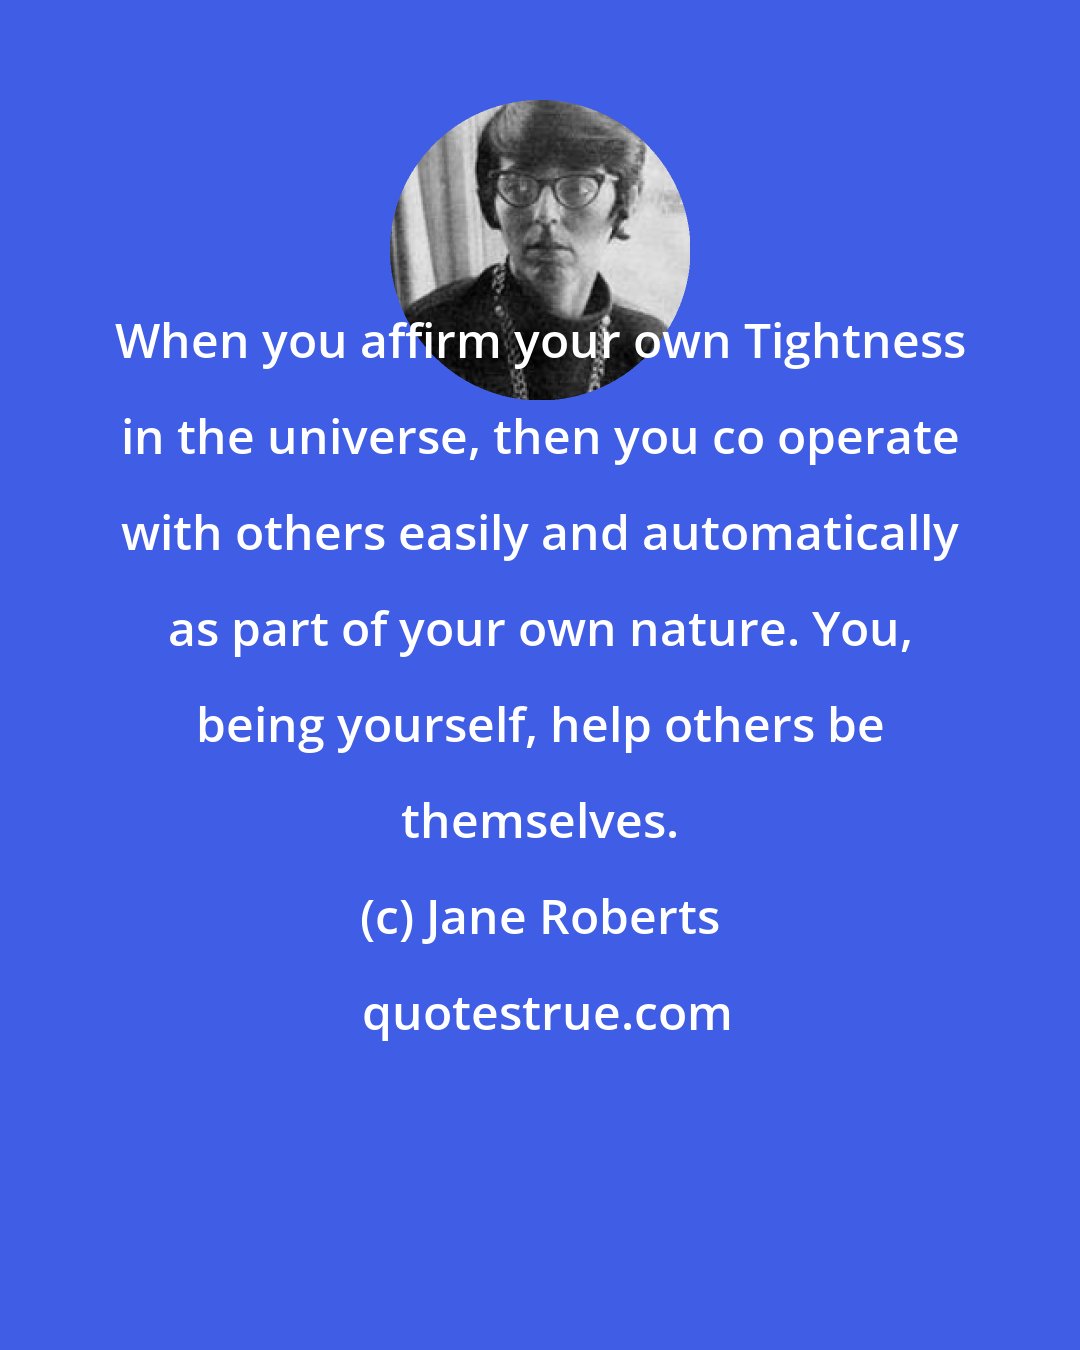 Jane Roberts: When you affirm your own Tightness in the universe, then you co operate with others easily and automatically as part of your own nature. You, being yourself, help others be themselves.